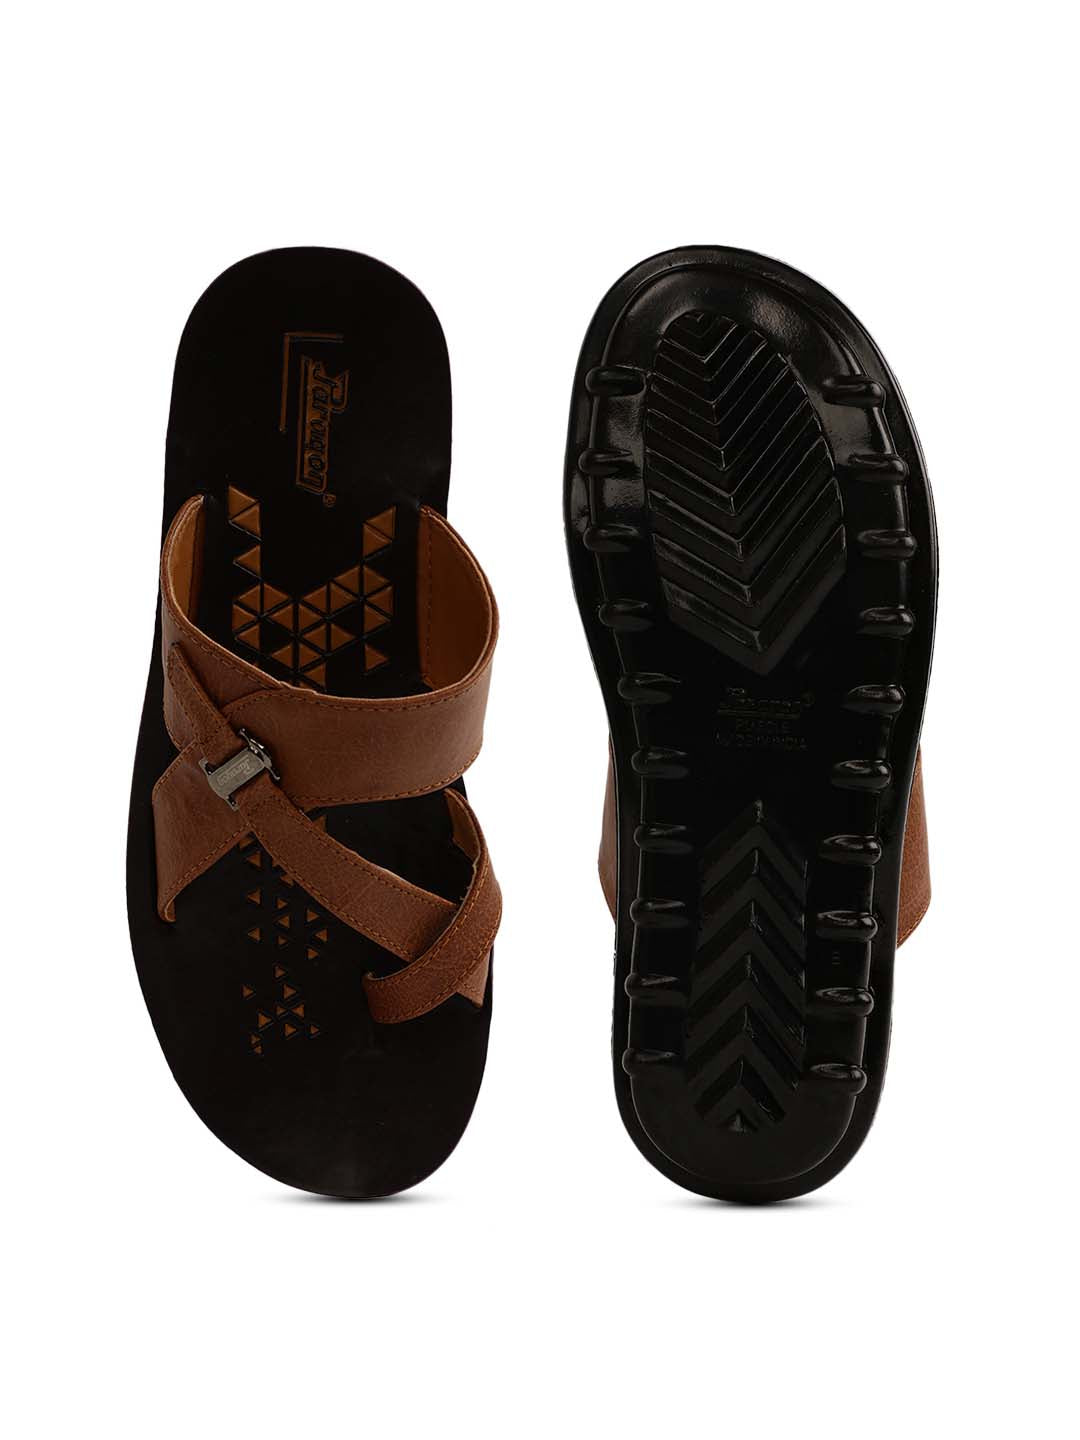 Paragon PU6883G Men Stylish Sandals | Comfortable Sandals for Daily Outdoor Use | Casual Formal Sandals with Cushioned Soles